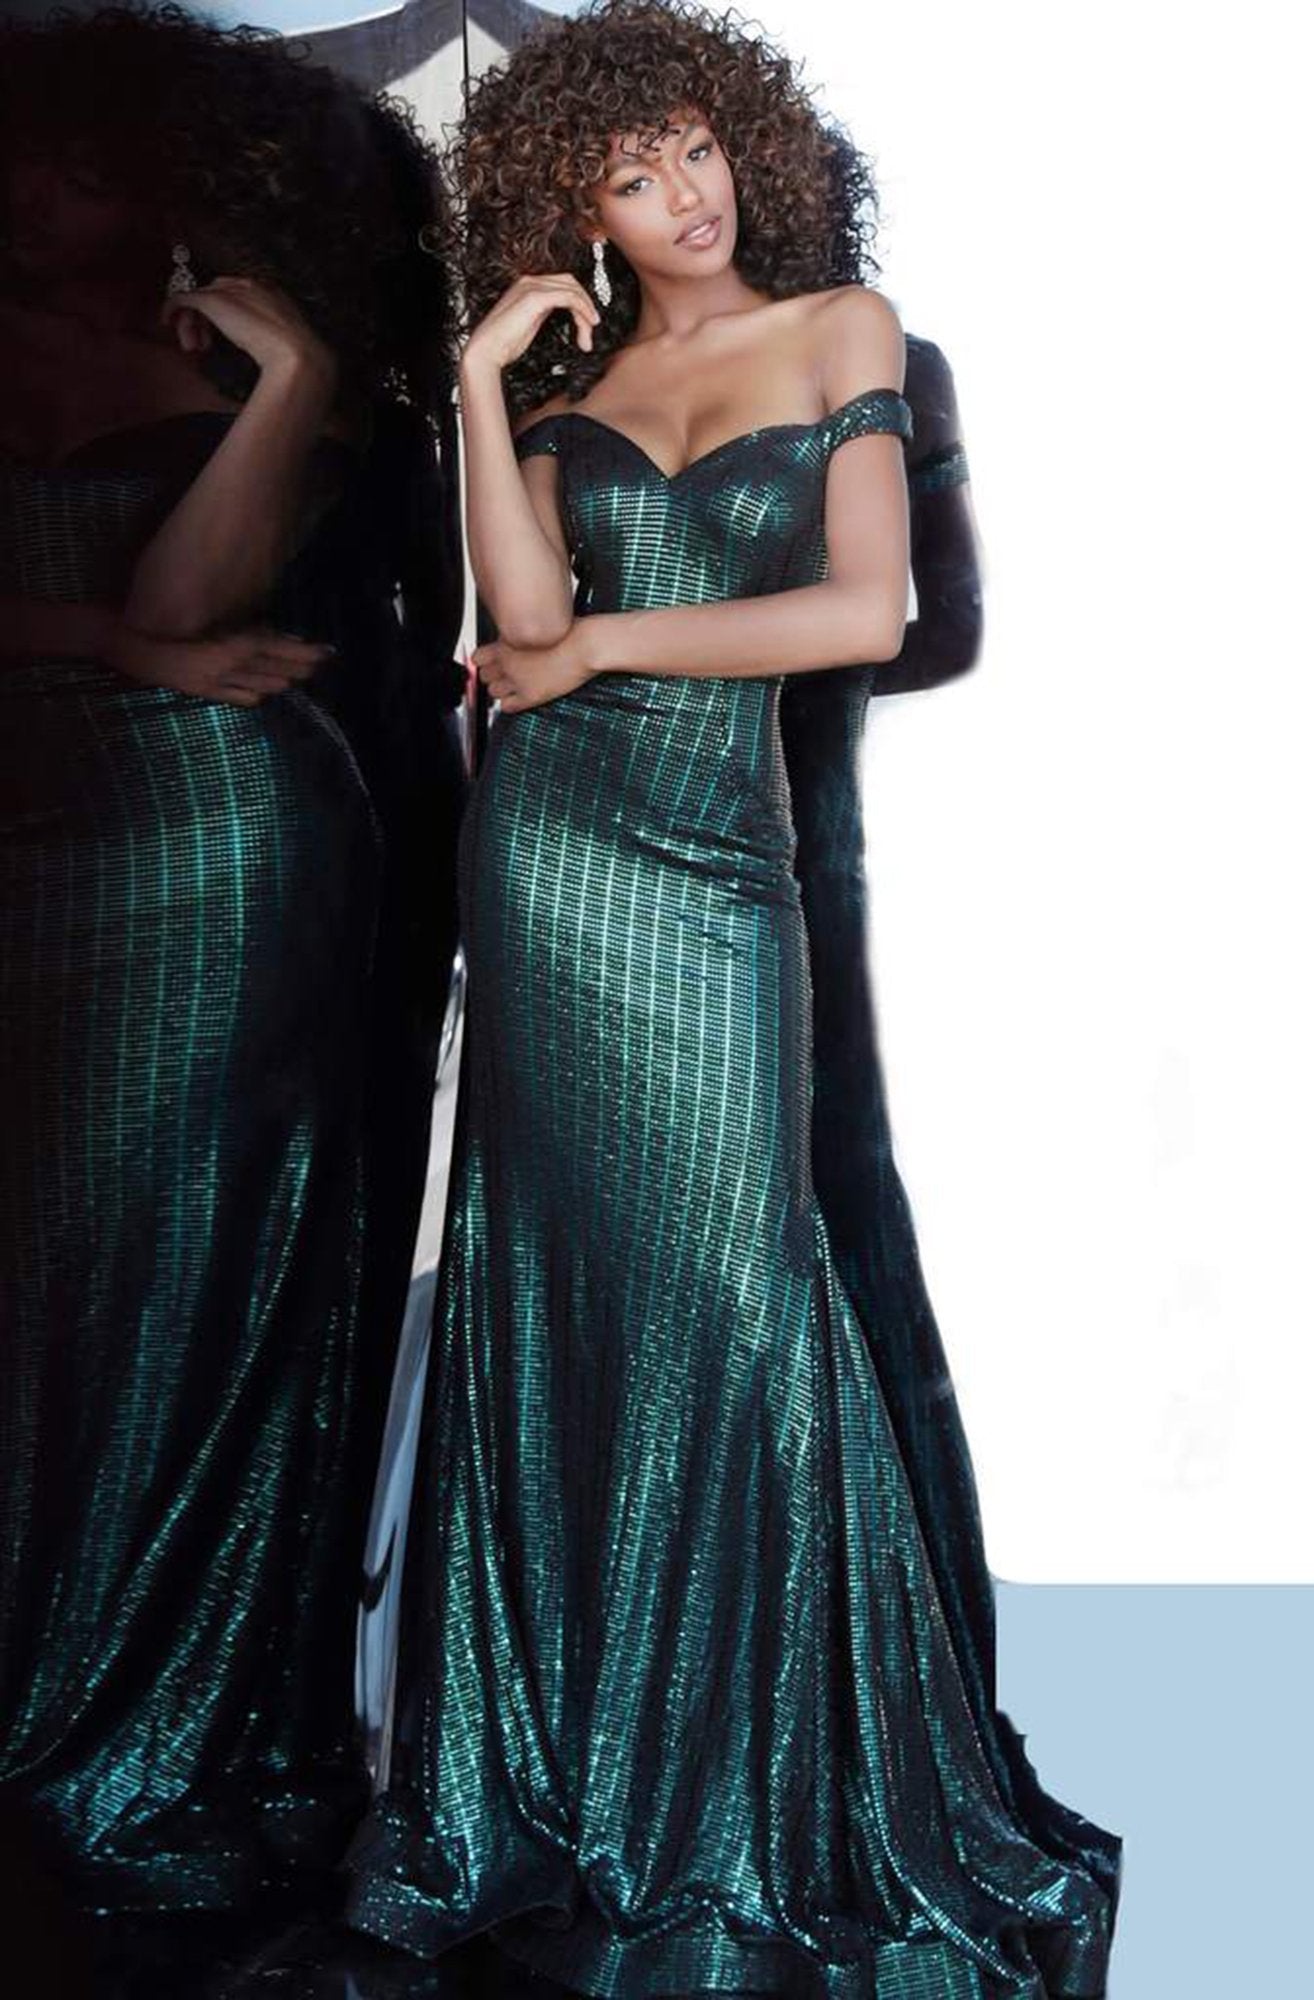 Jovani - Metallic Striped Off Shoulder Trumpet Gown 00974SC In Black and Green